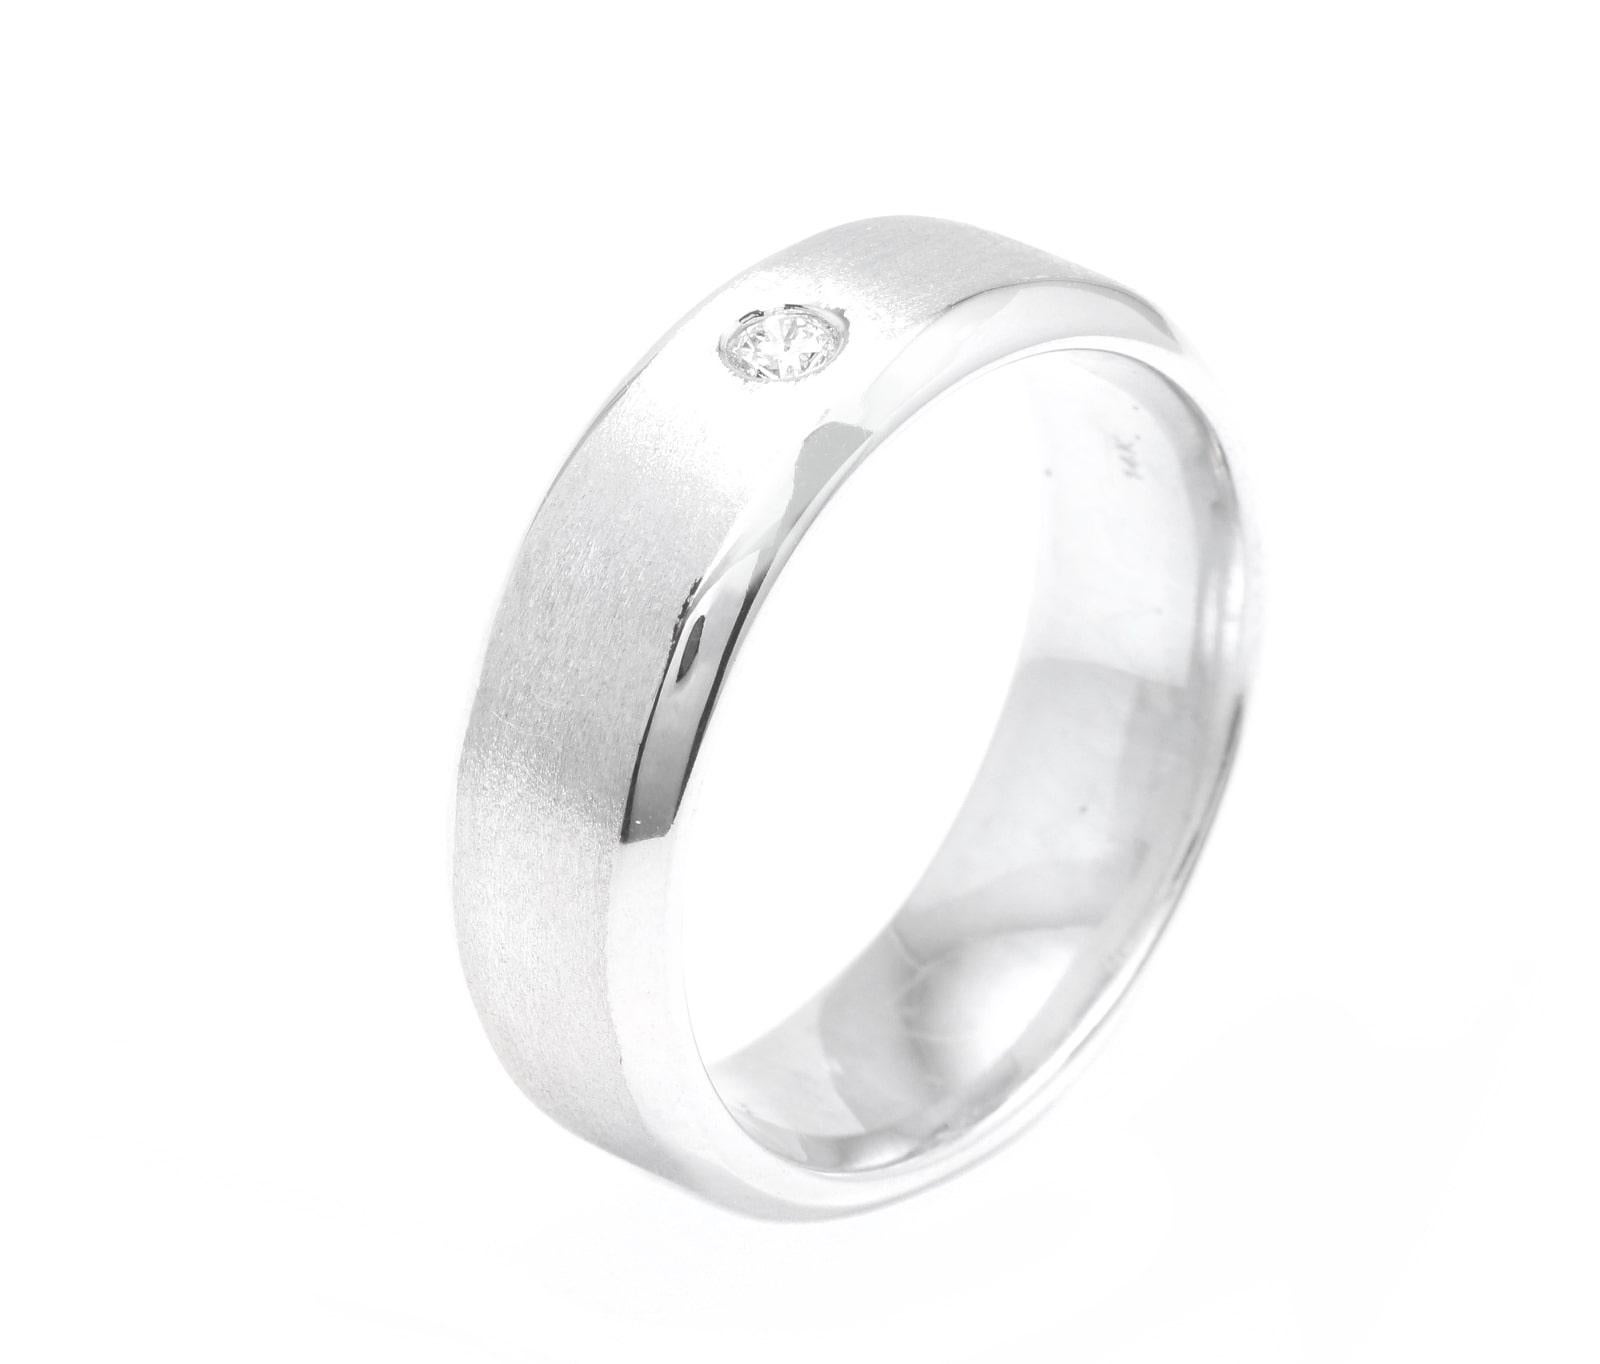 14K Solid White Gold Diamond Men's Matte Wedding Ring

Amazing looking piece!

Suggested Replacement Value: $5,000.00

Total Natural Round Cut Diamond Weight: Approx. 0.08 Carats (color G / Clarity VS2)

Width of the ring: 7mm

Ring Size: 10 (free